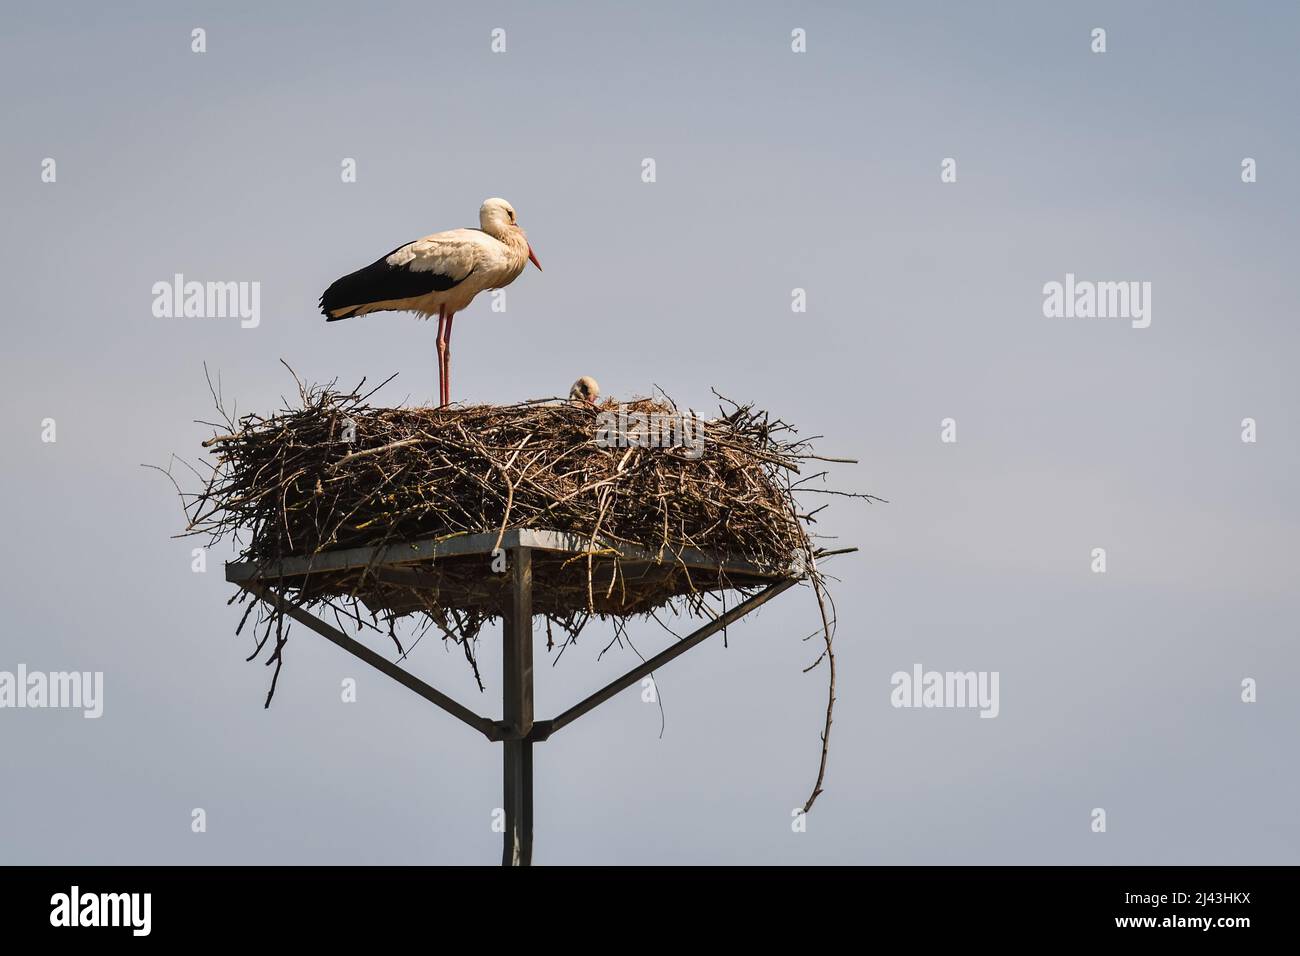 Early spring scene. Storks in a nest with a blue sky in the background. Stock Photo